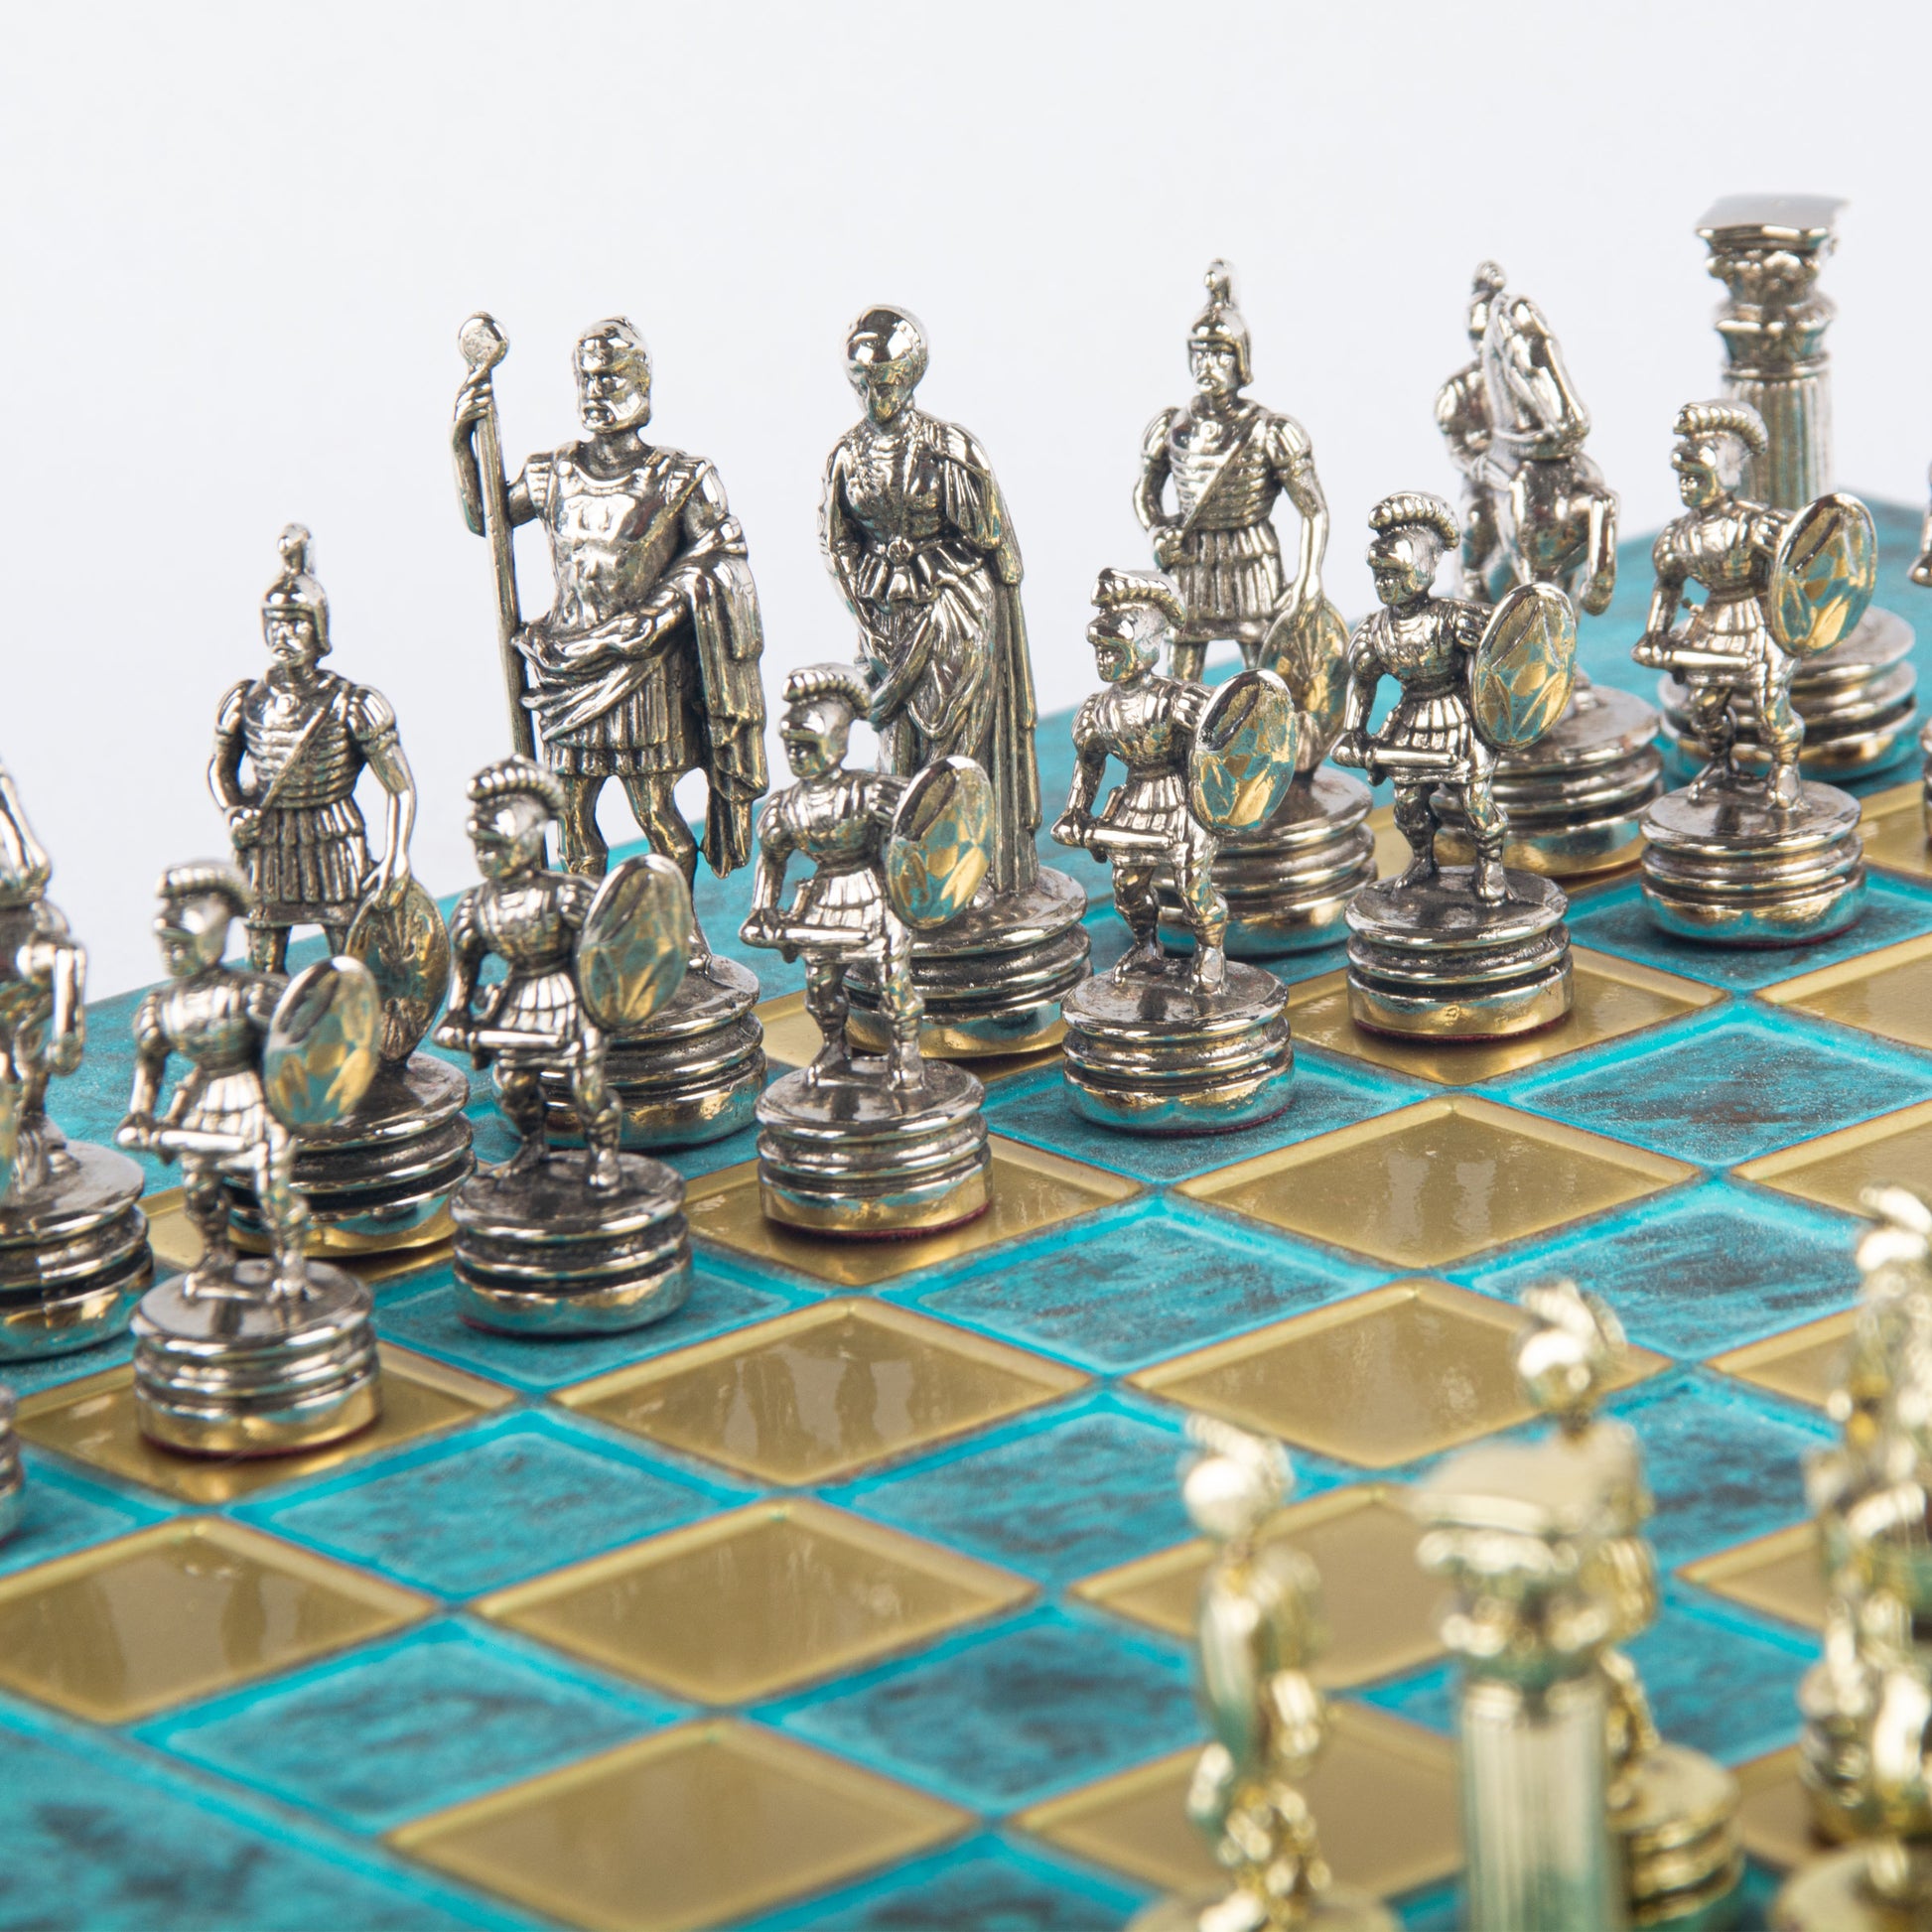 GREEK ROMAN PERIOD CHESS SET with gold/silver chessmen and bronze chessboard 28 x 28cm (Small) - Premium Chess from MANOPOULOS Chess & Backgammon - Just €163! Shop now at MANOPOULOS Chess & Backgammon